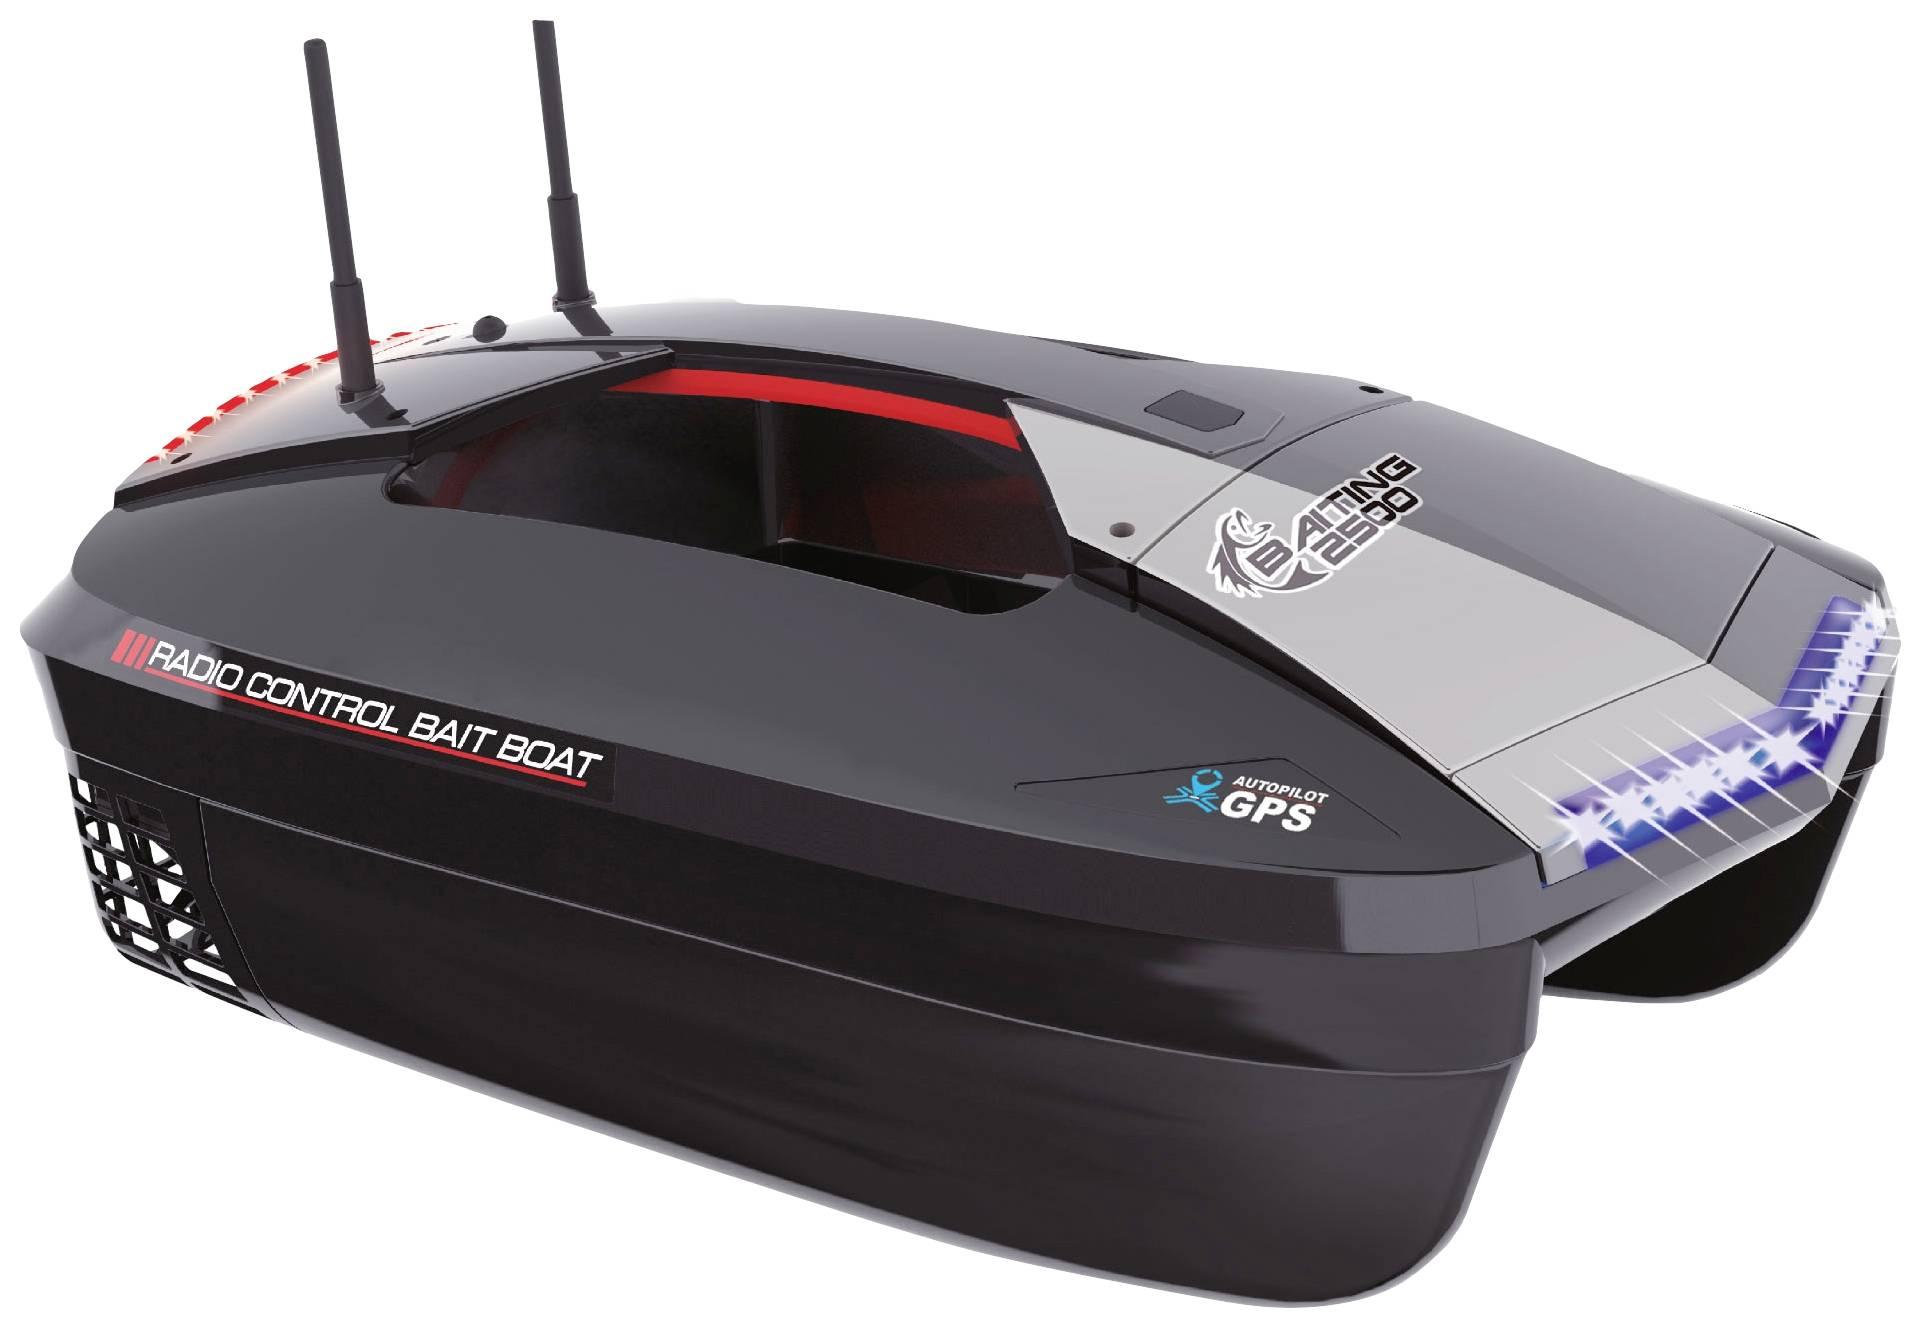 Amewi Rc Boat: Overview of Amewi RC Boat